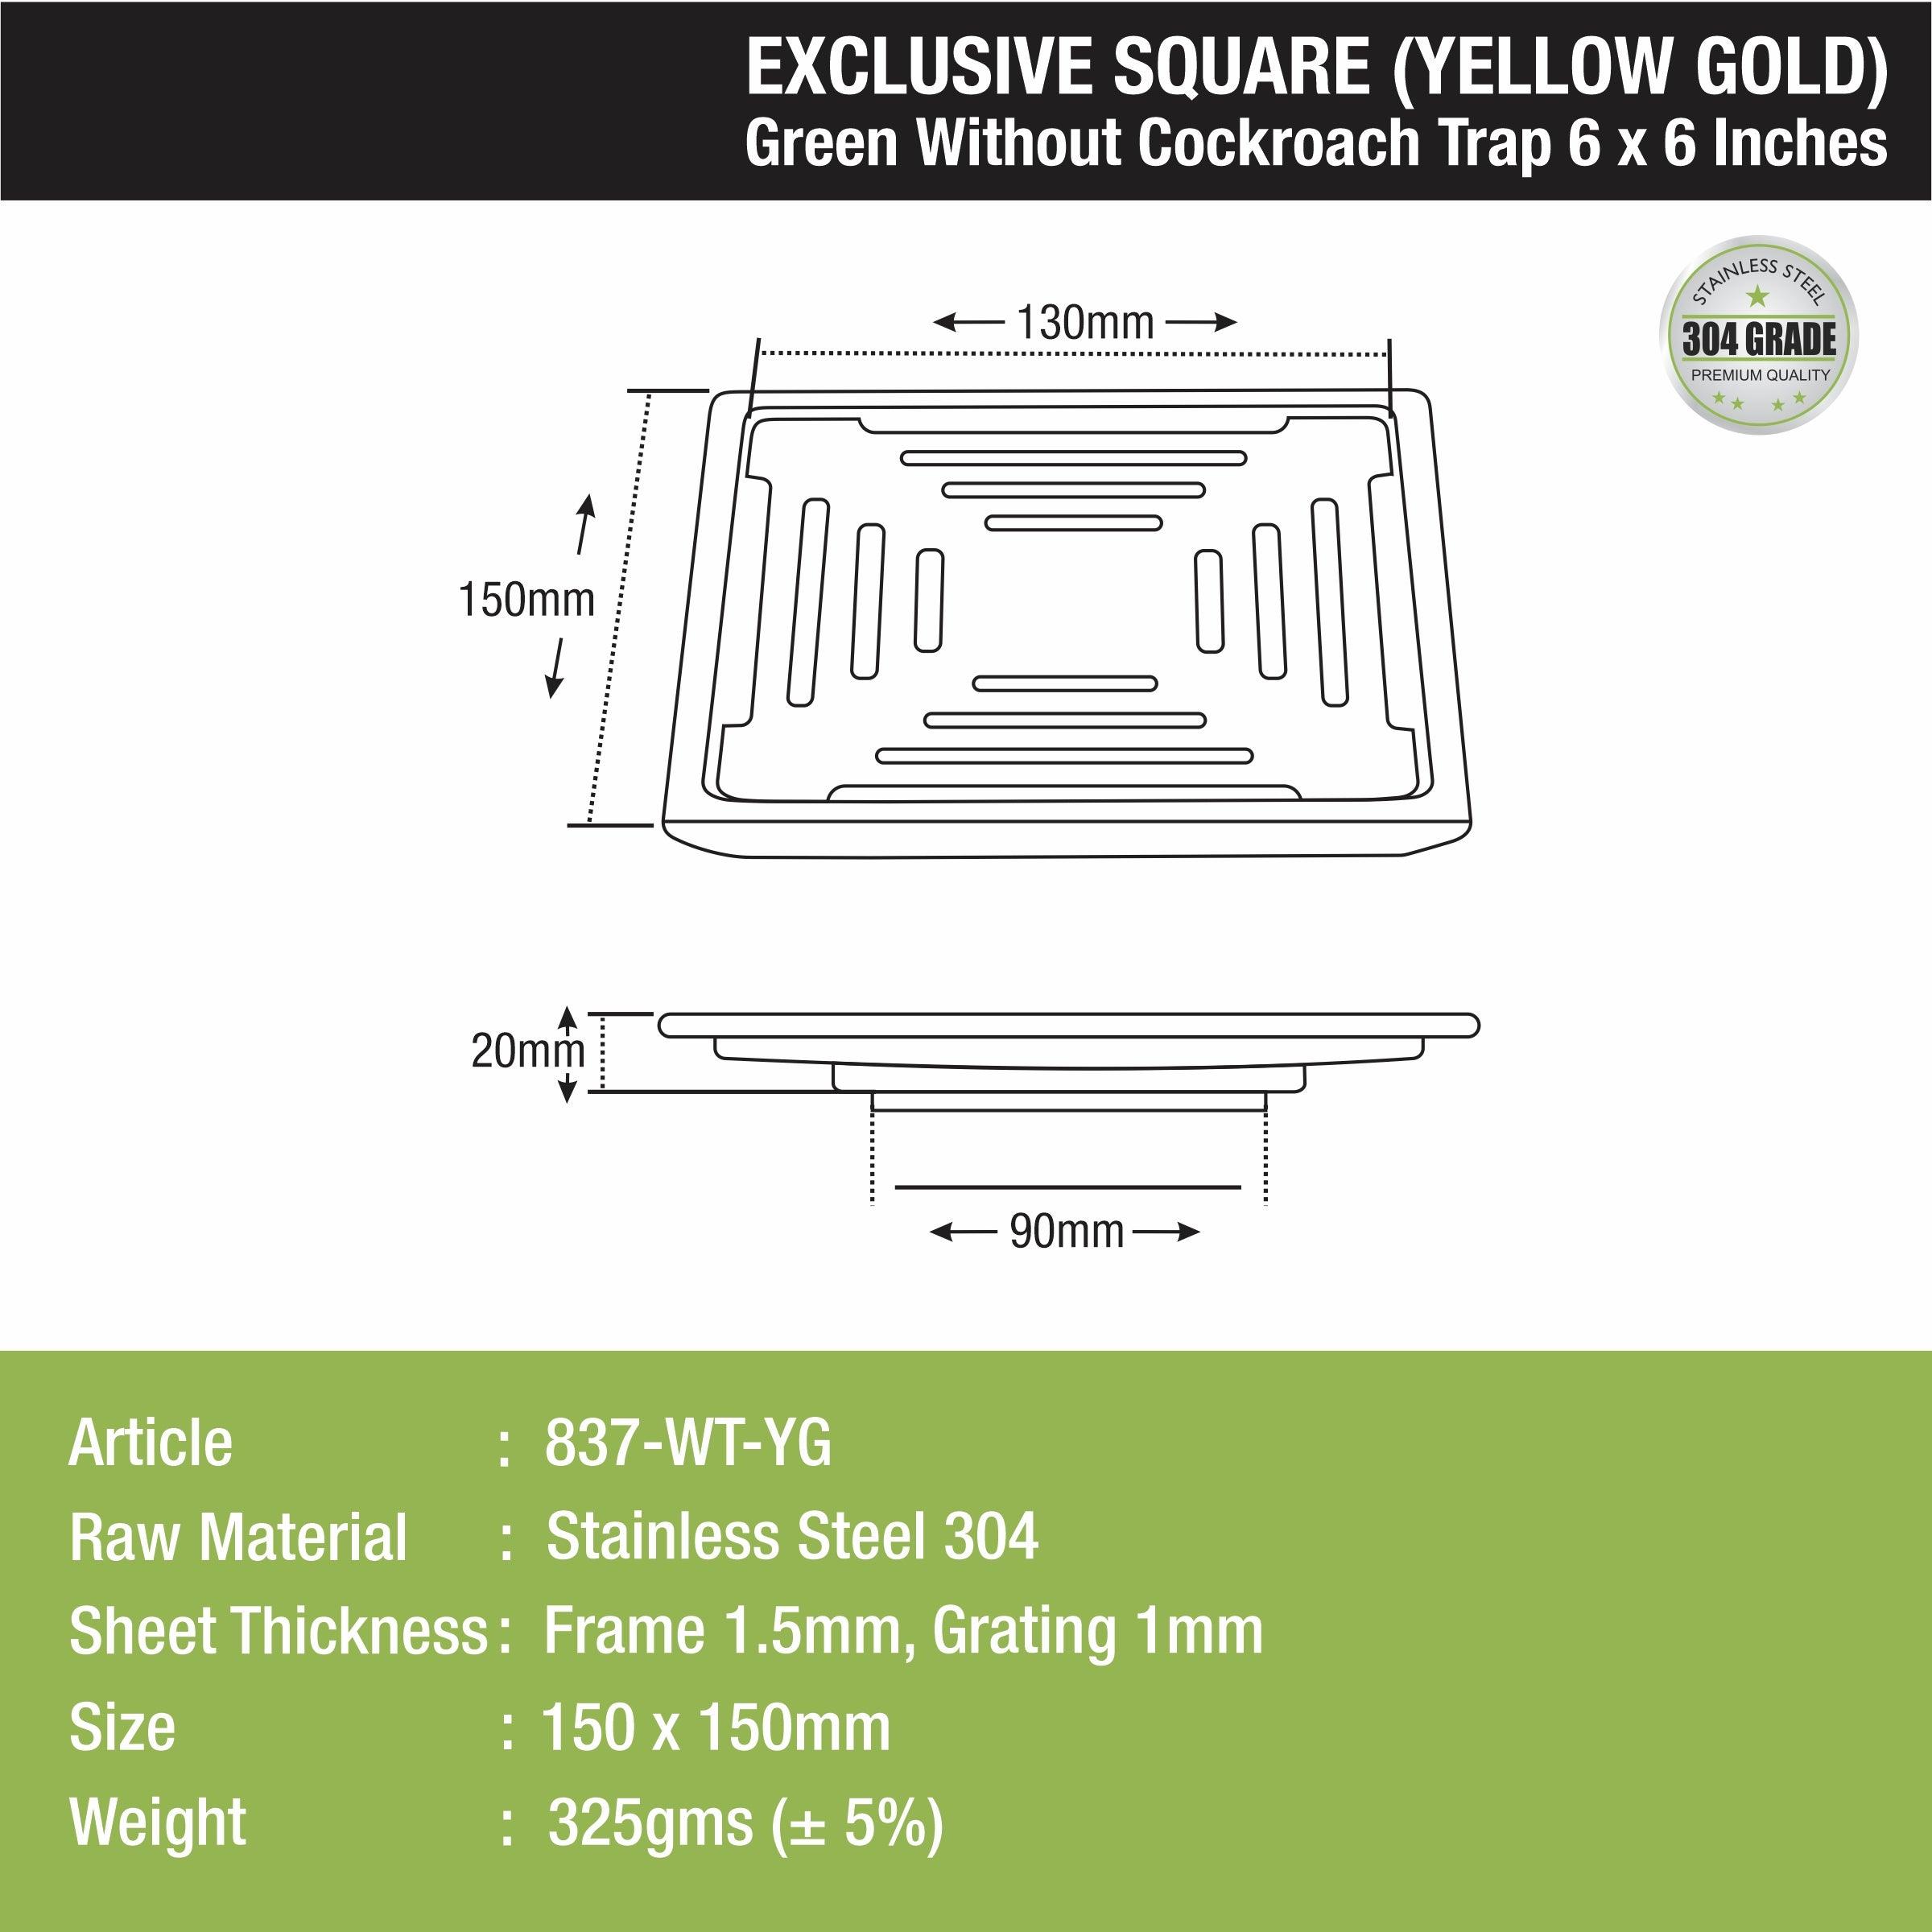 Green Exclusive Square Floor Drain in Yellow Gold PVD Coating (6 x 6 Inches) - LIPKA - Lipka Home